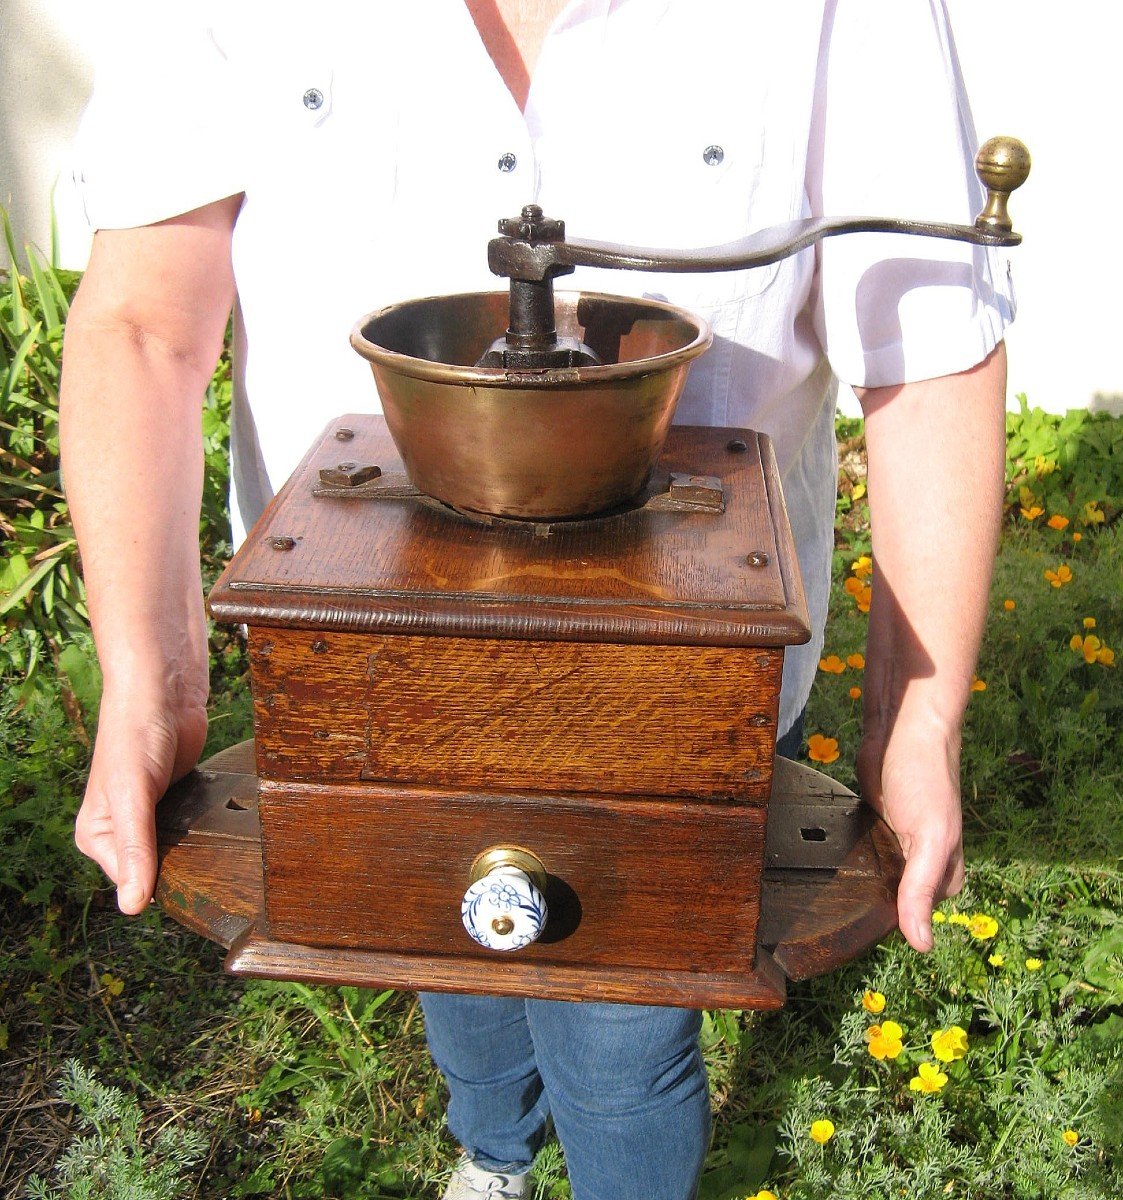 Important Coffee Grinder From 18th Century Grocery Counter.